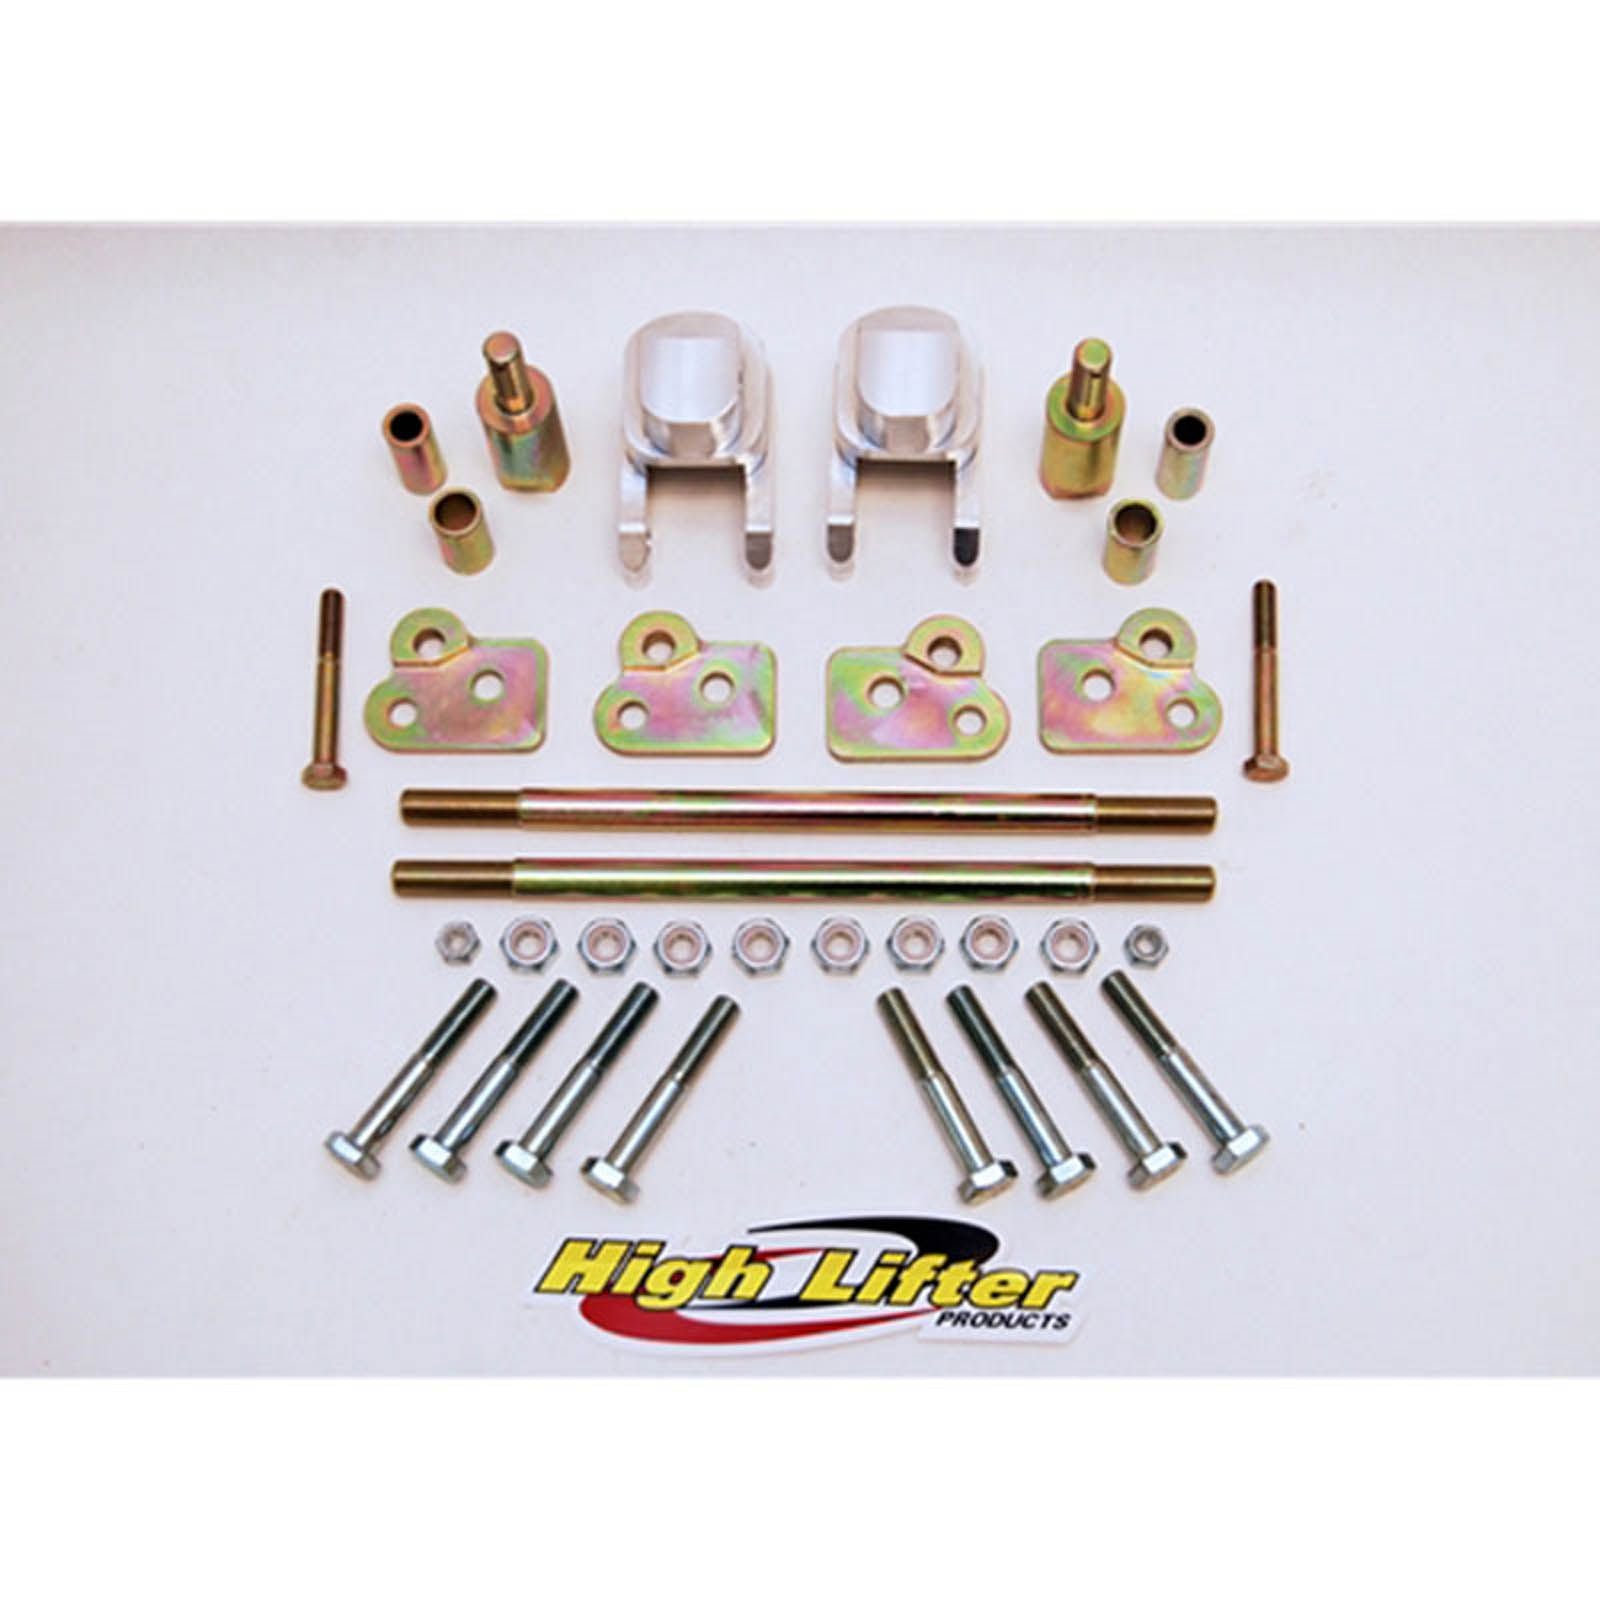 New HIGHLIFTER Lift Kit For Can Am 500/800 Renegade #HLCLK80002